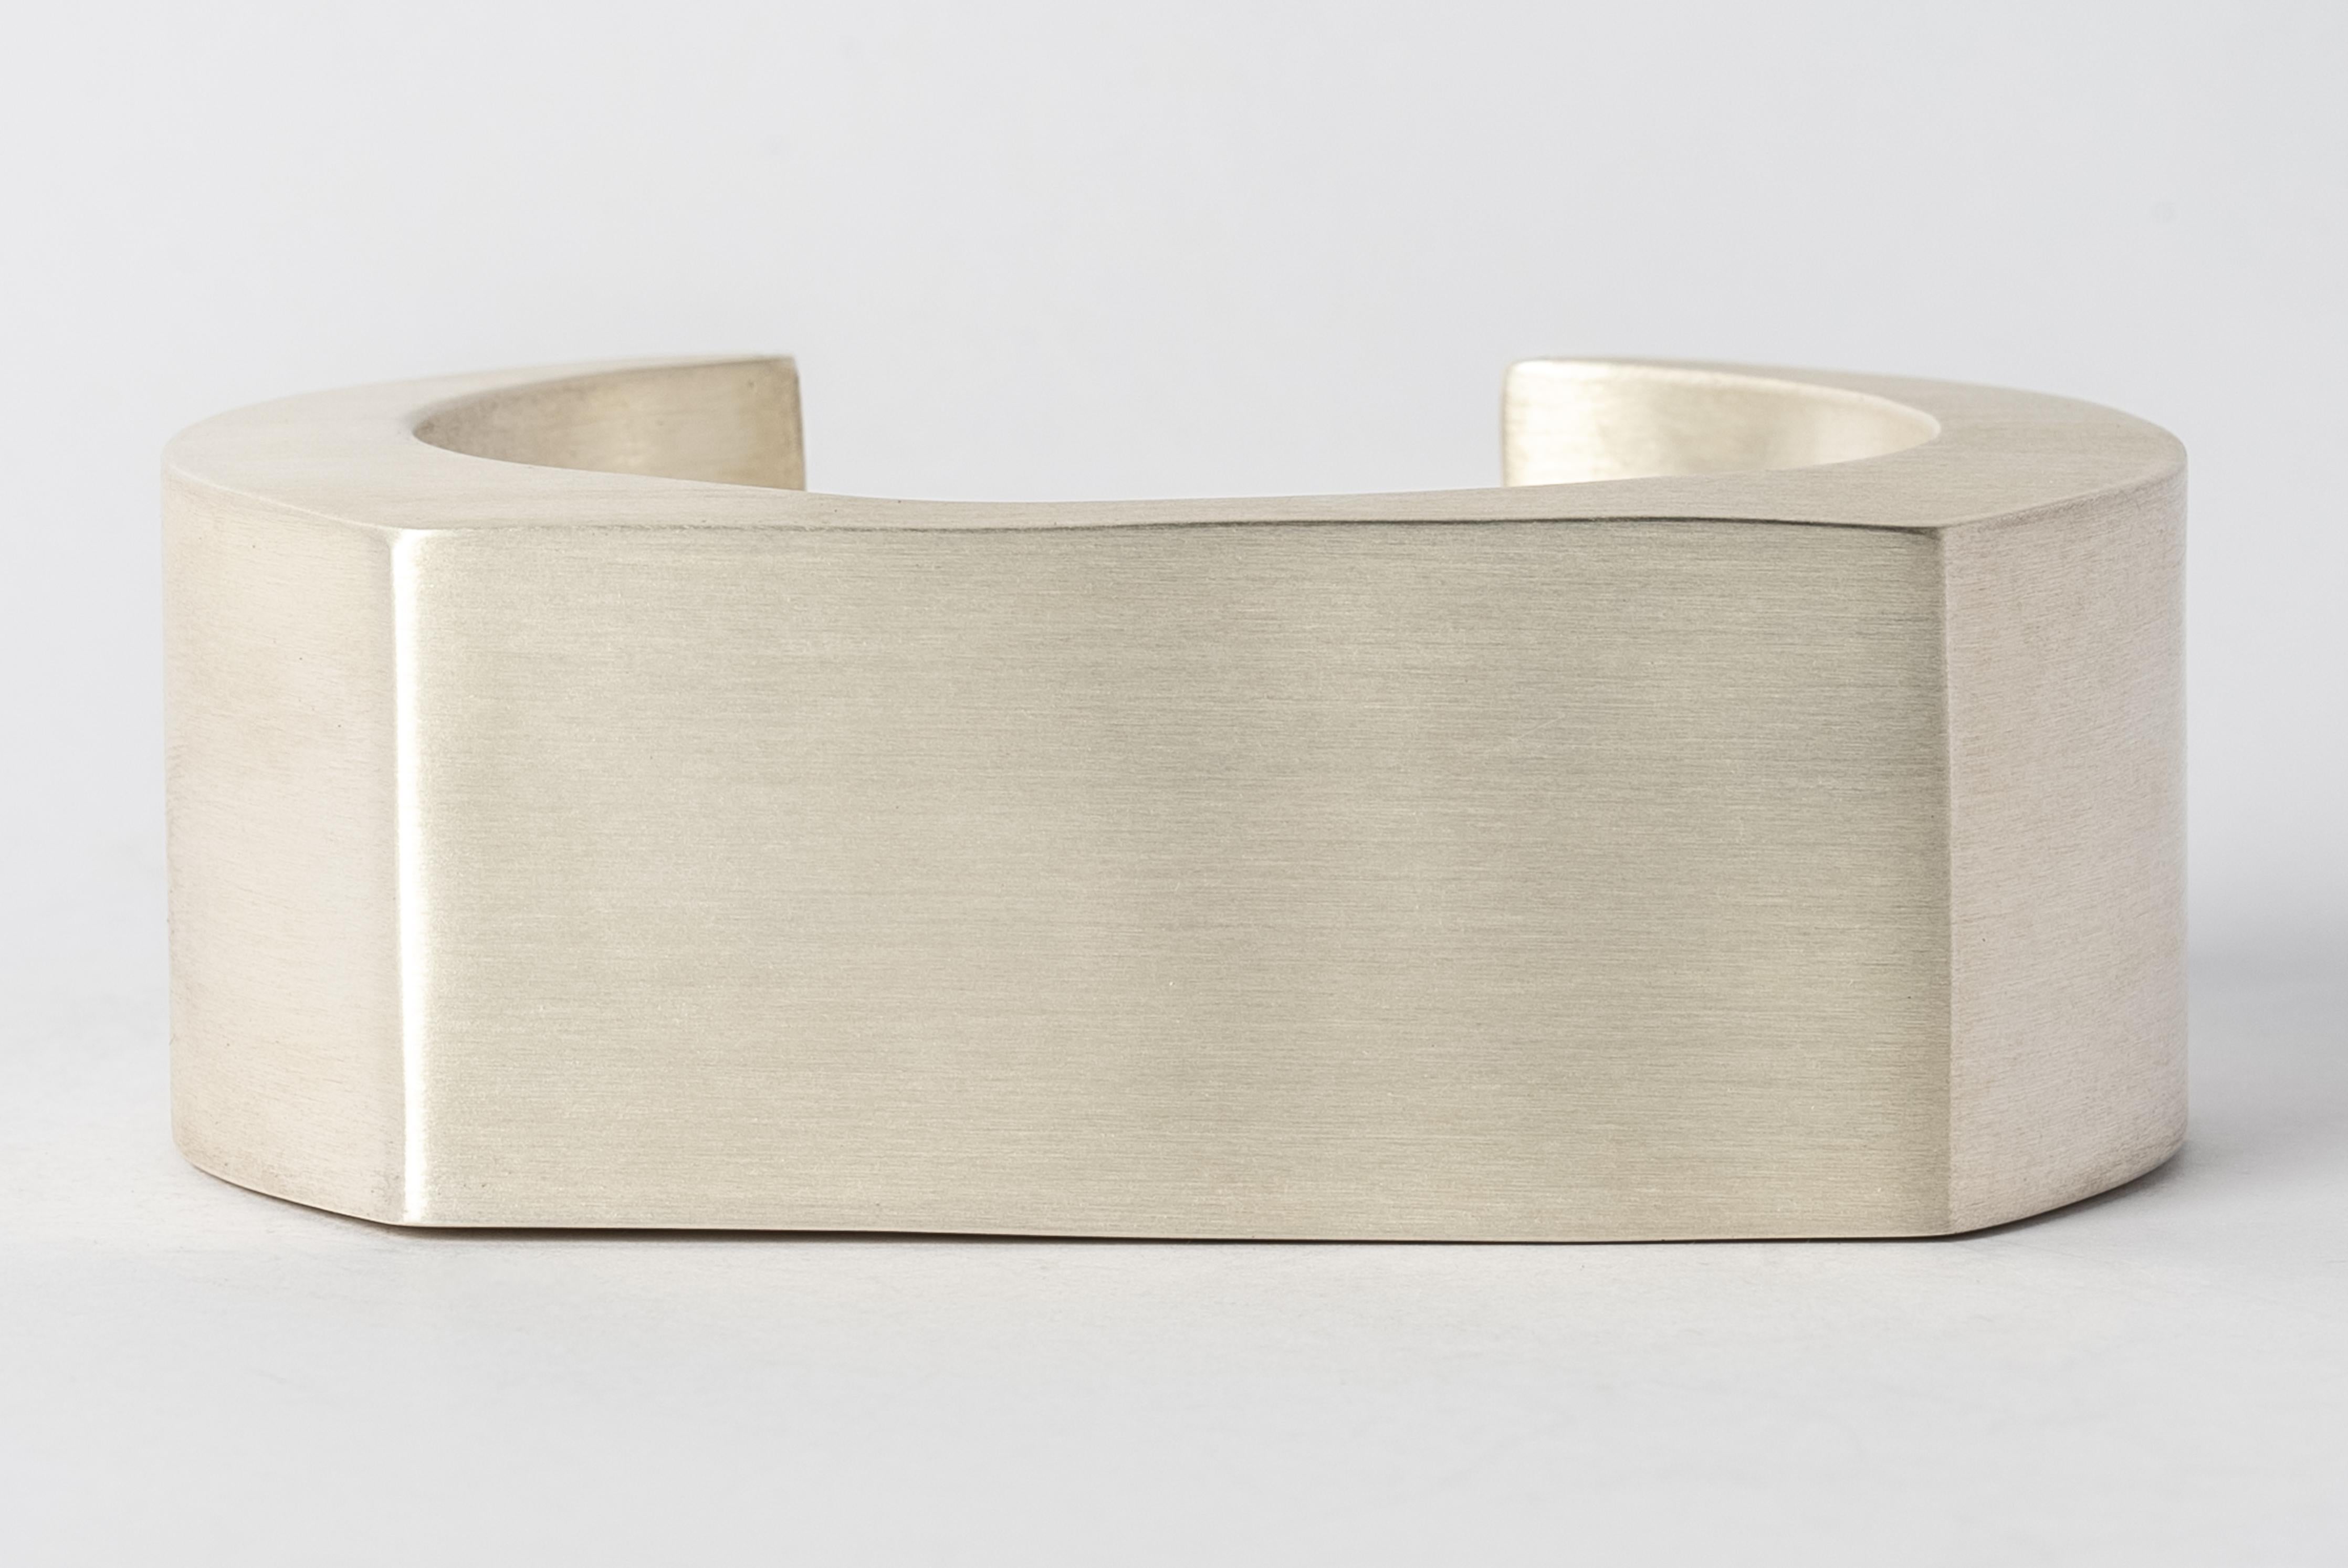 Crescent Plane Bracelet (30mm, MA) In New Condition For Sale In Paris, FR